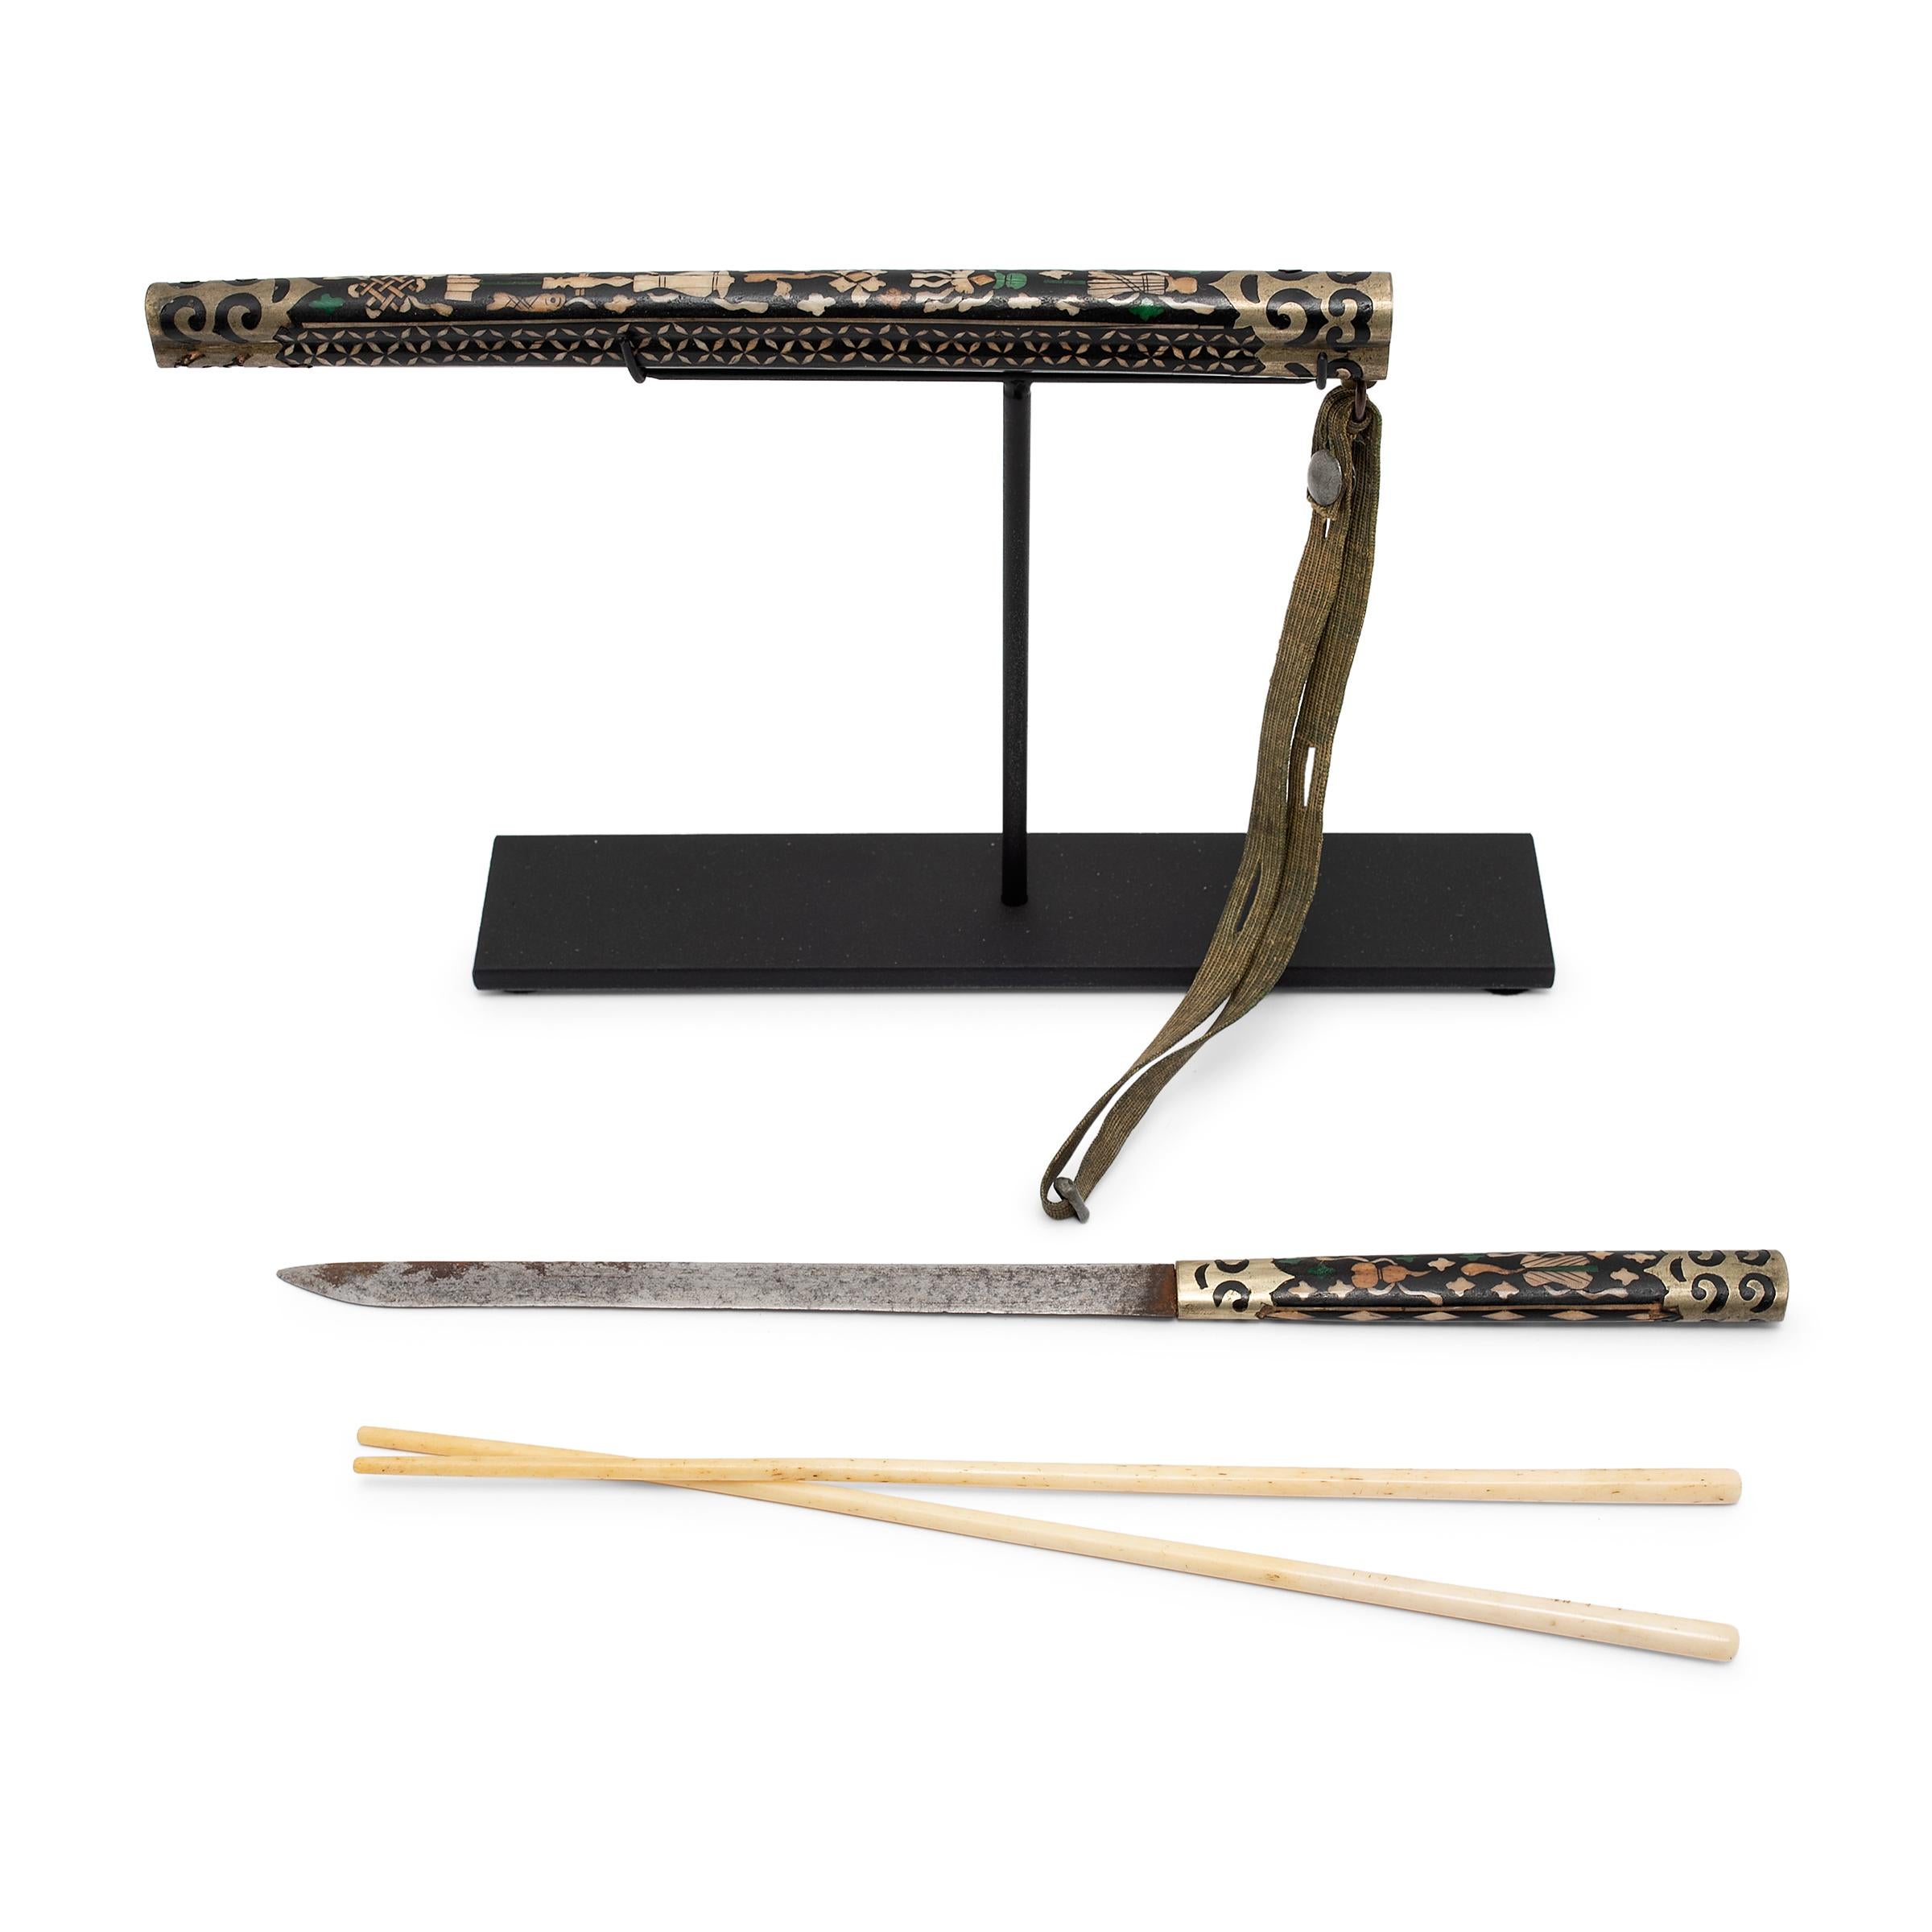 19th Century Chinese Traveling Knife and Chopstick Set with Bone Inlay, c. 1850